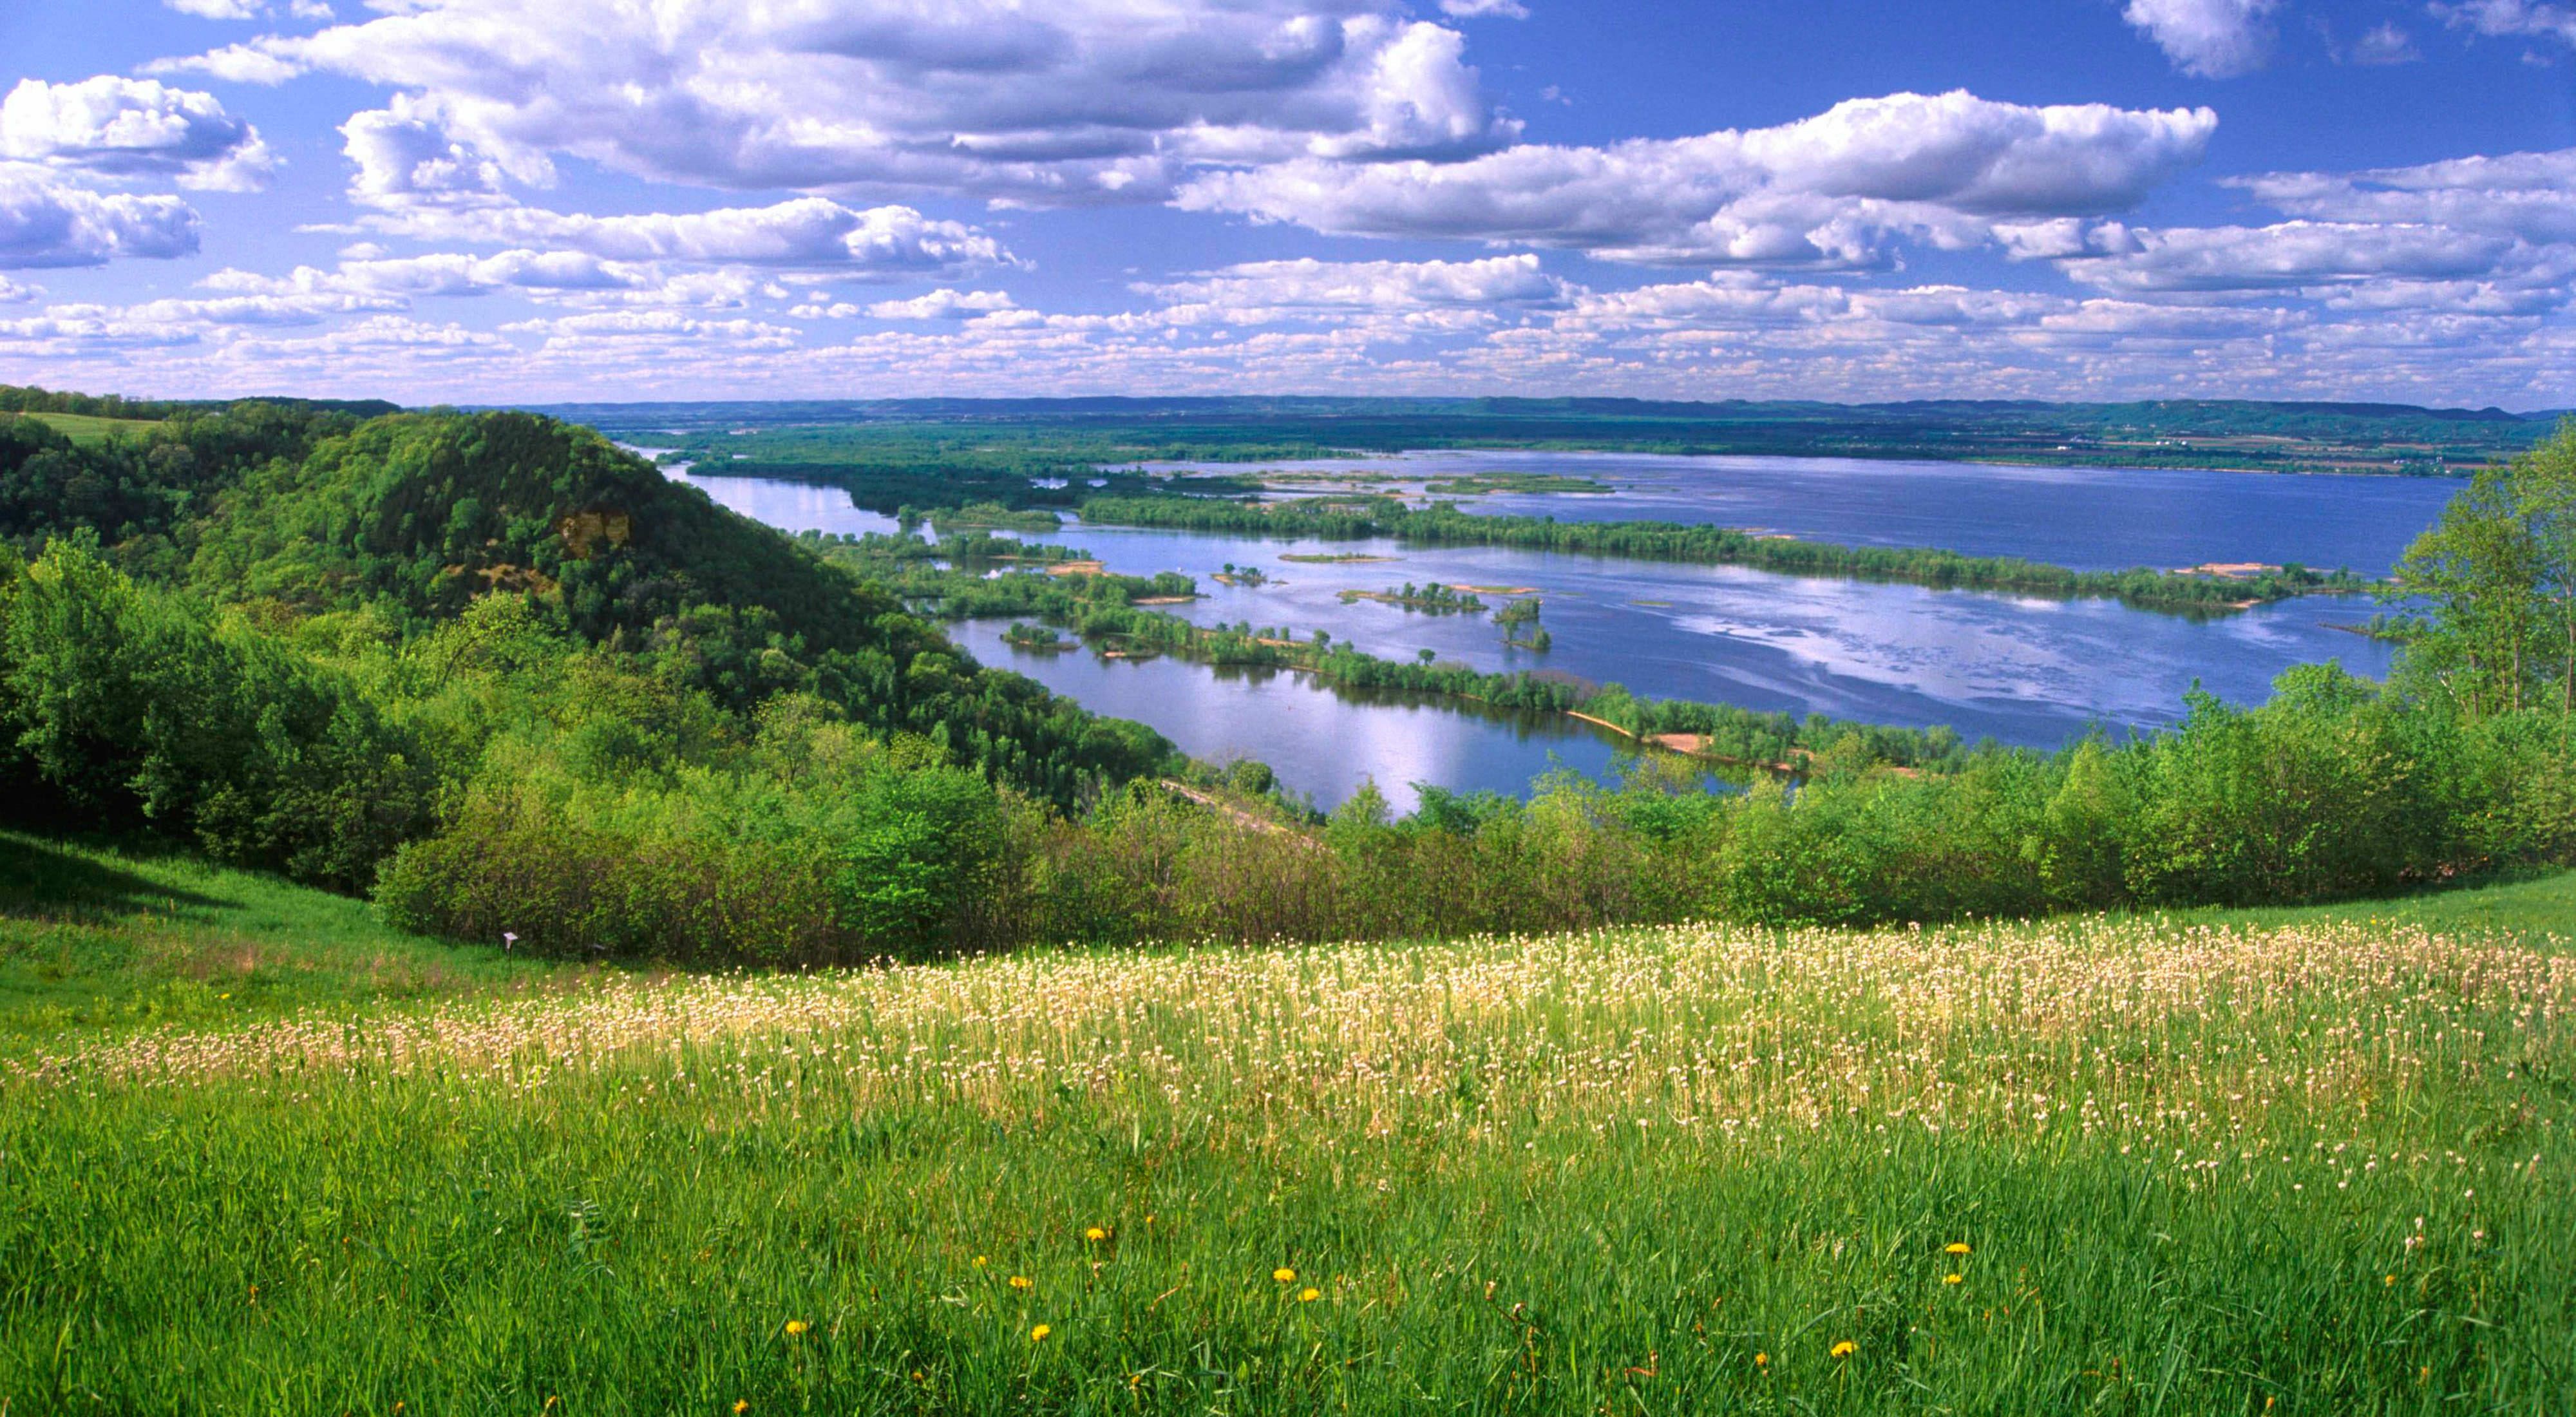 A green field overlooks a calm river and wetlands.